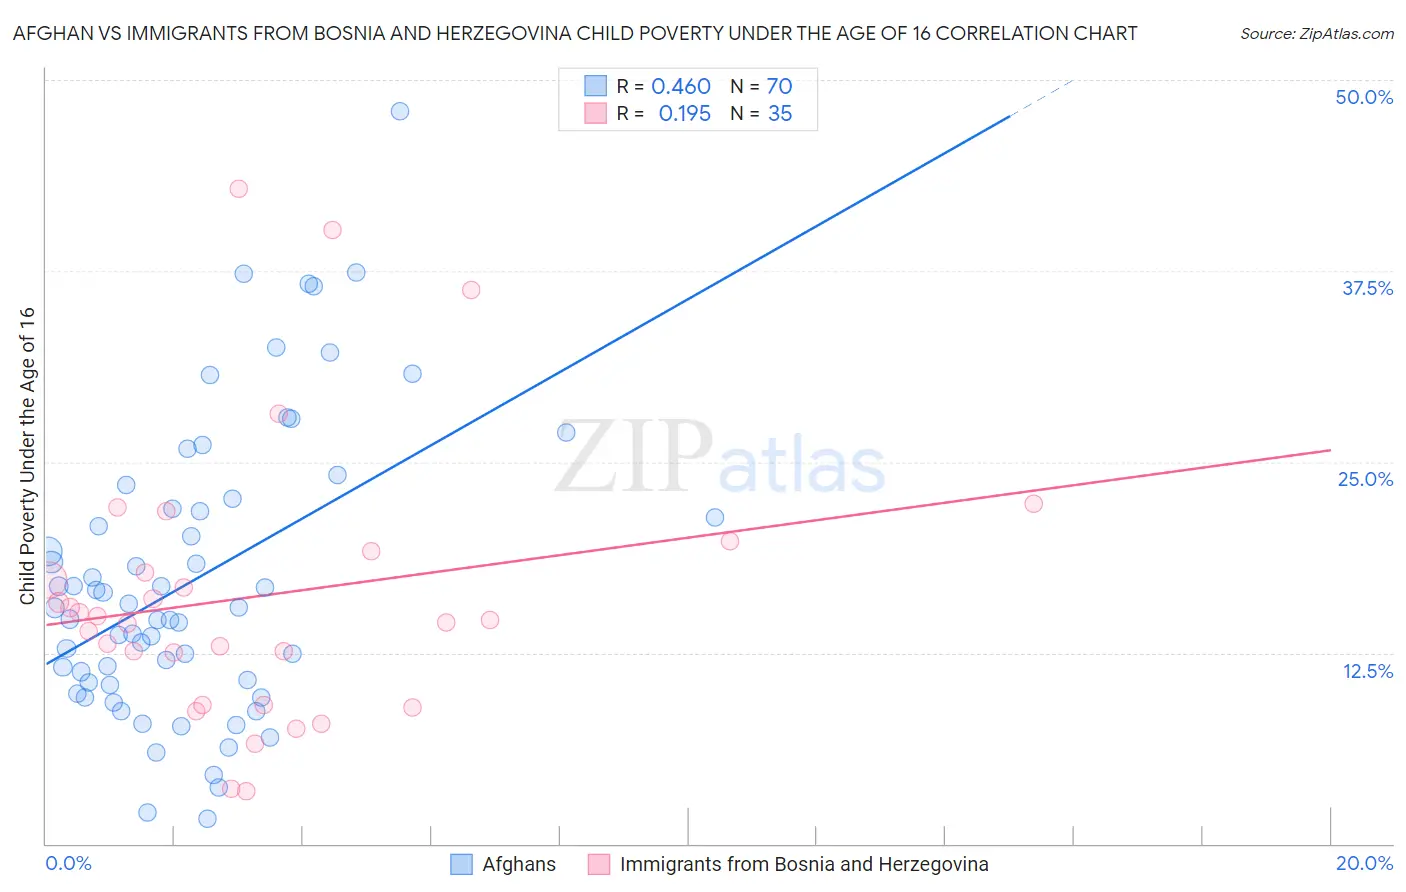 Afghan vs Immigrants from Bosnia and Herzegovina Child Poverty Under the Age of 16